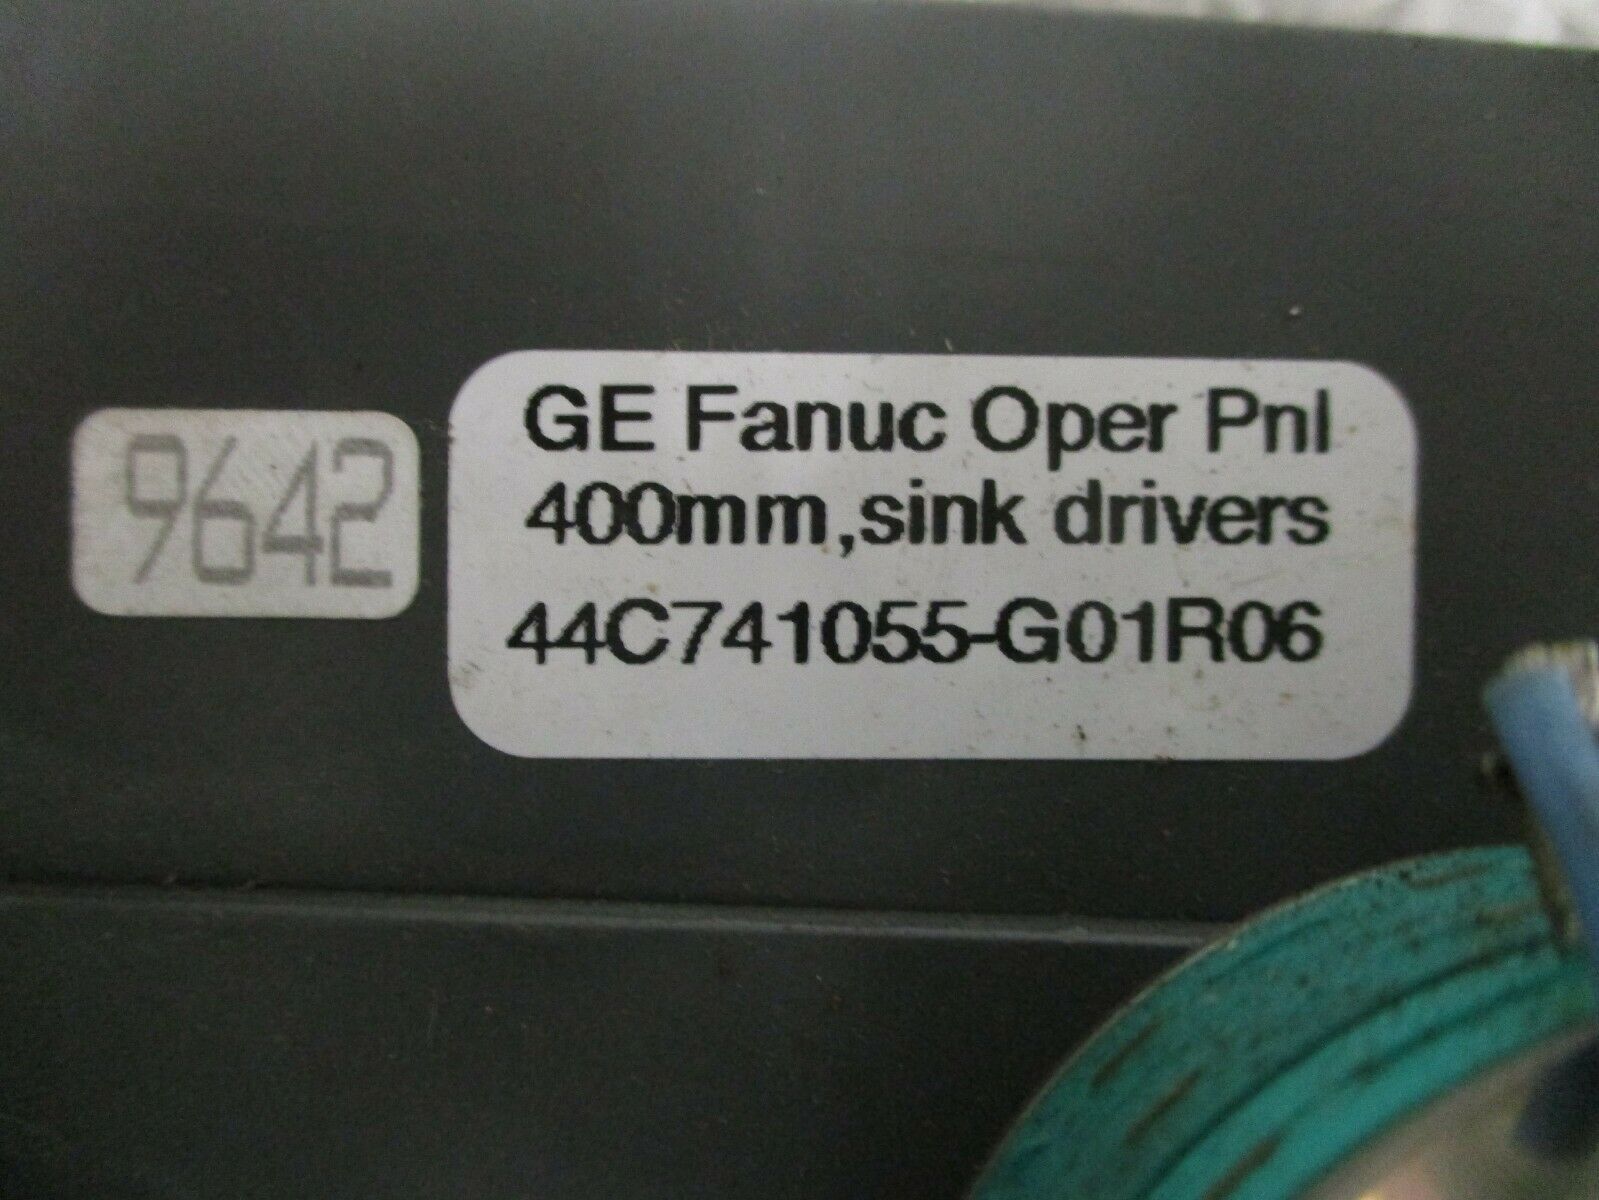 Ge FANUC 44c741055-g01r06 Operator Panel 400mm Sink Drivers *xlnt* for sale online 